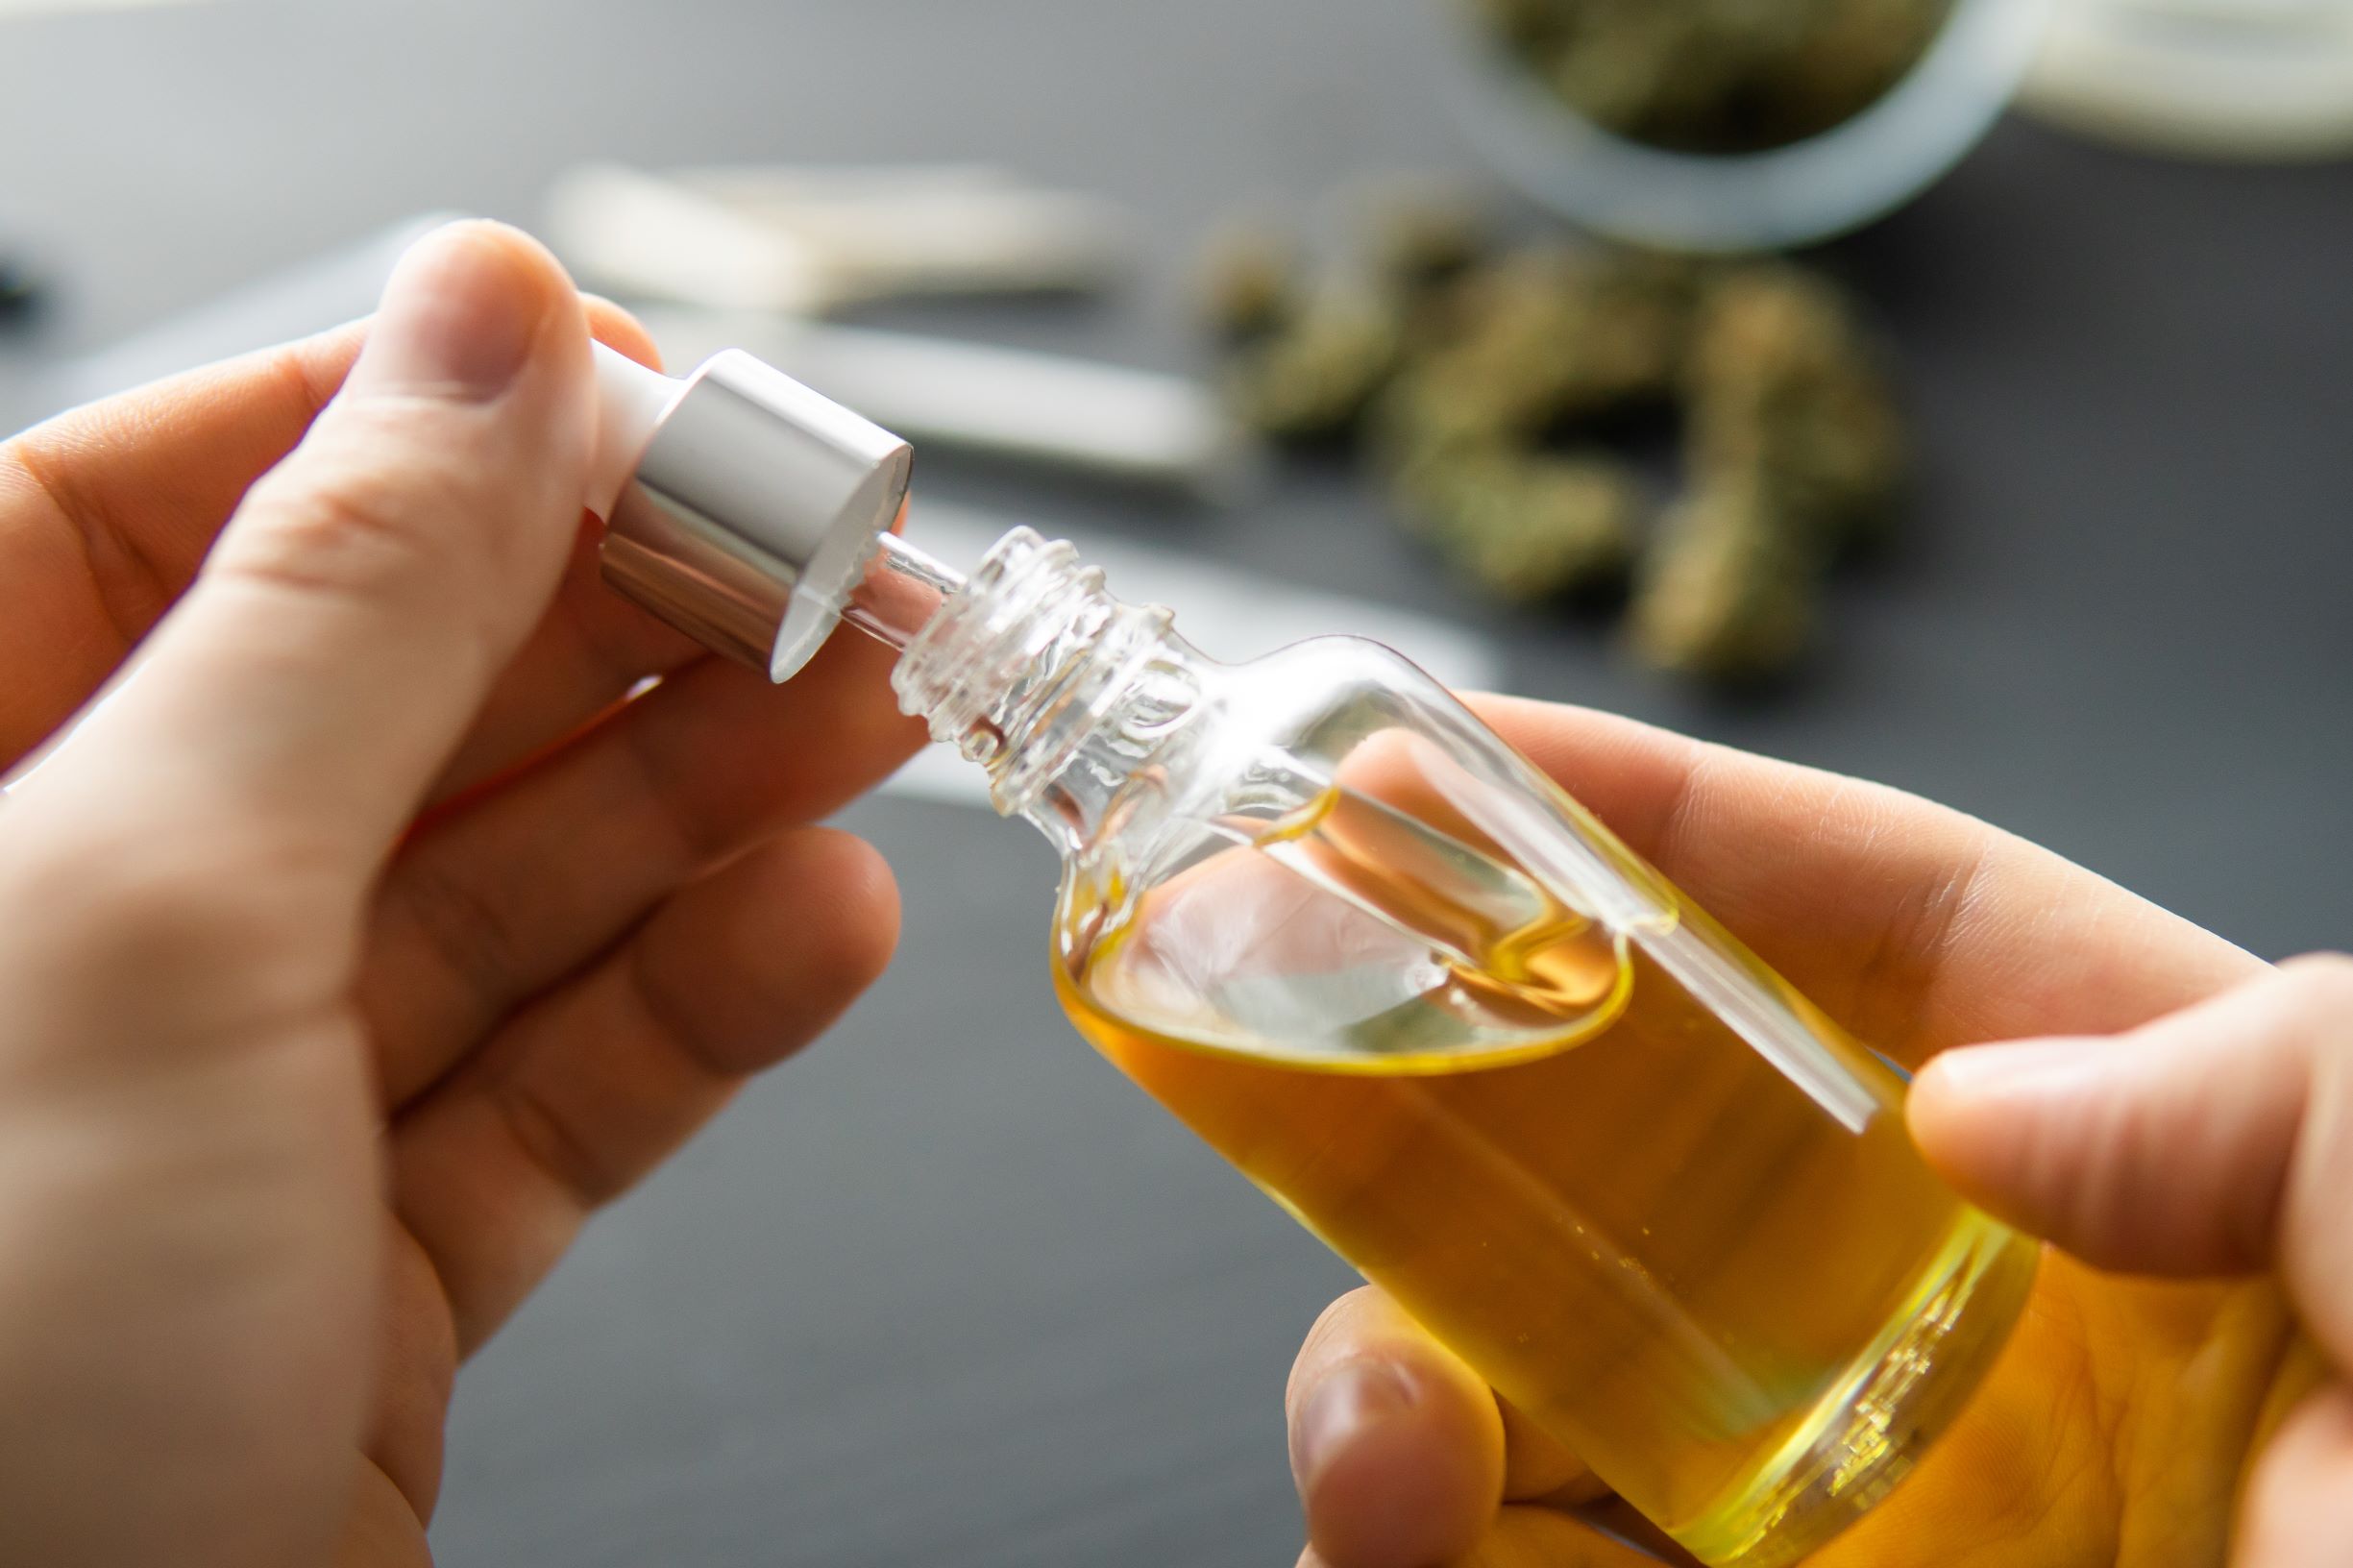 What Does CBD Oil Do, Exactly?